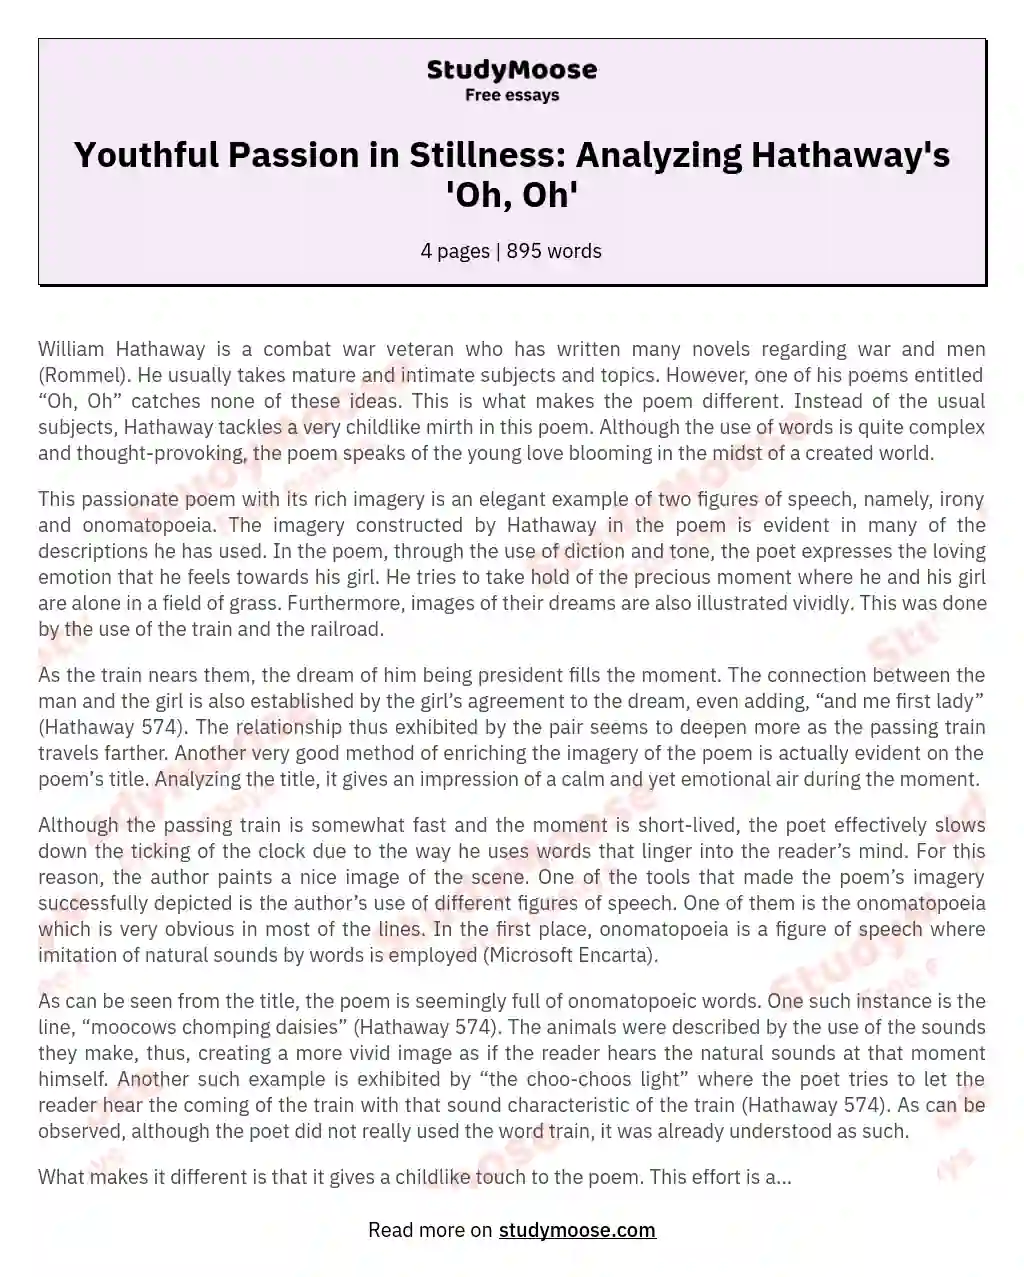 Youthful Passion in Stillness: Analyzing Hathaway's 'Oh, Oh' essay